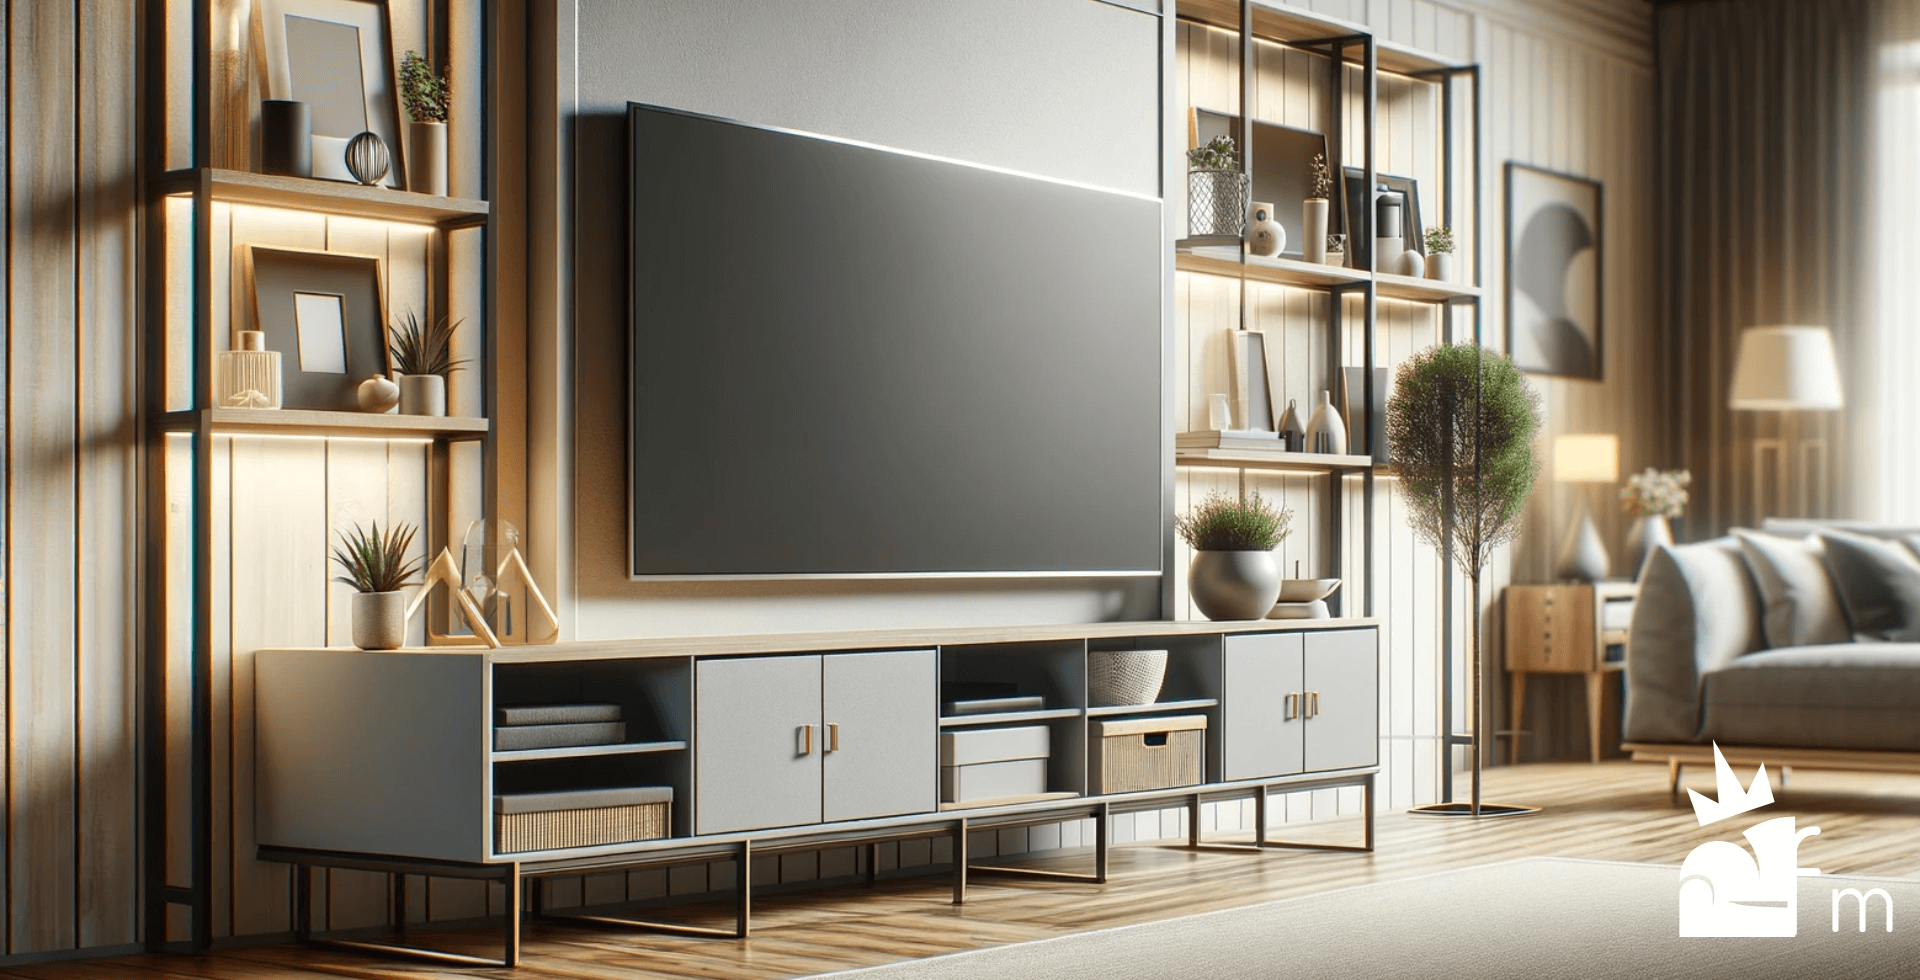 65 Inch TV Stand Buying Guide By An Interior